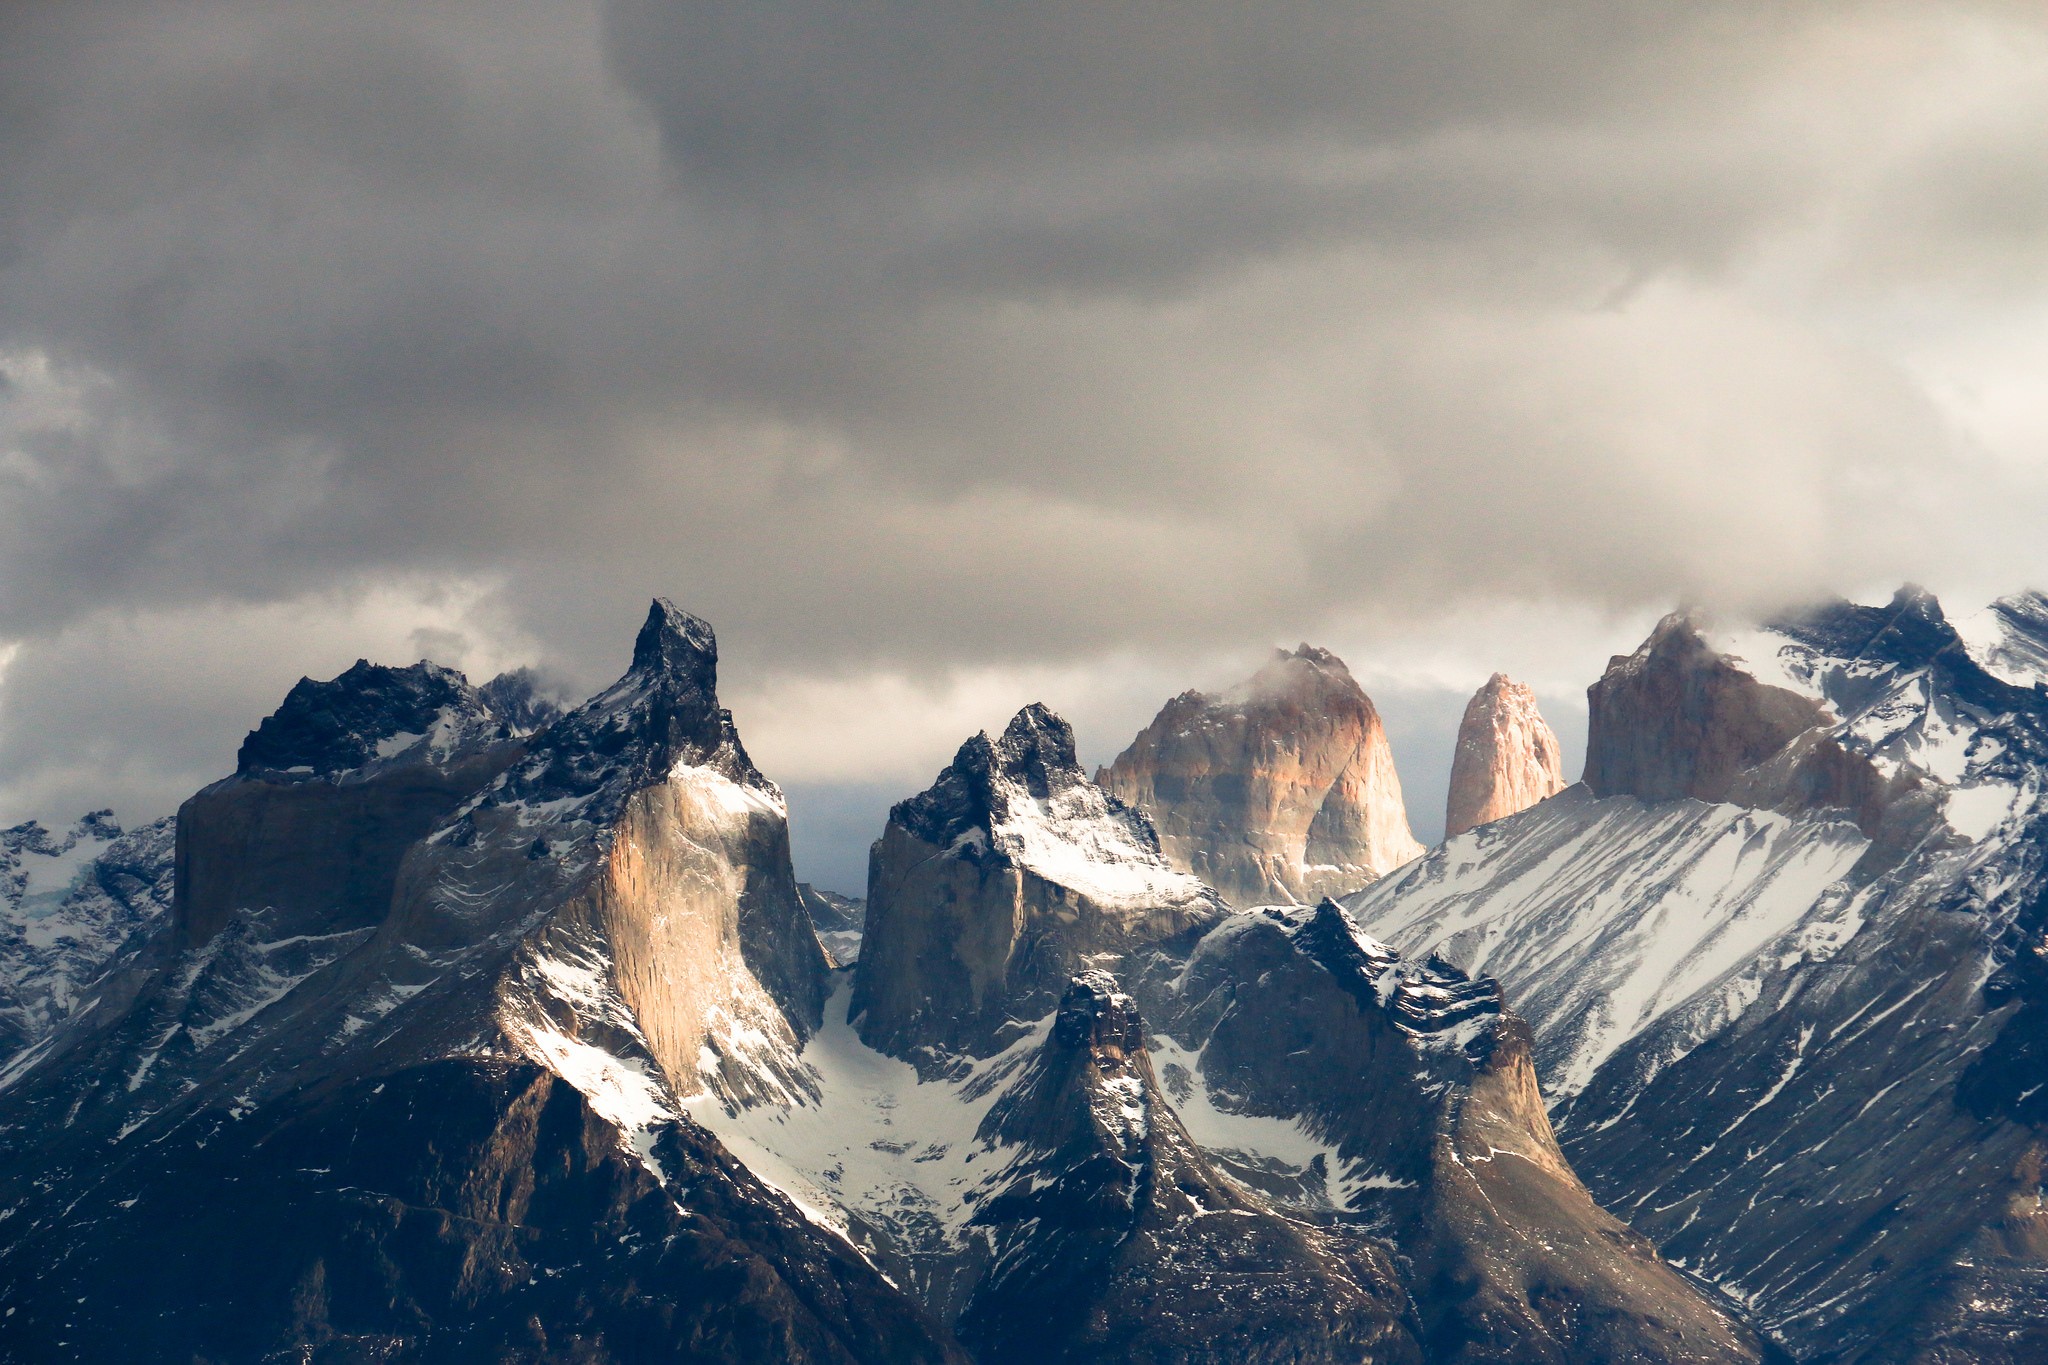 General 2048x1365 Patagonia mountains landscape overcast Torres del Paine cliff South America snowy peak nature Chile